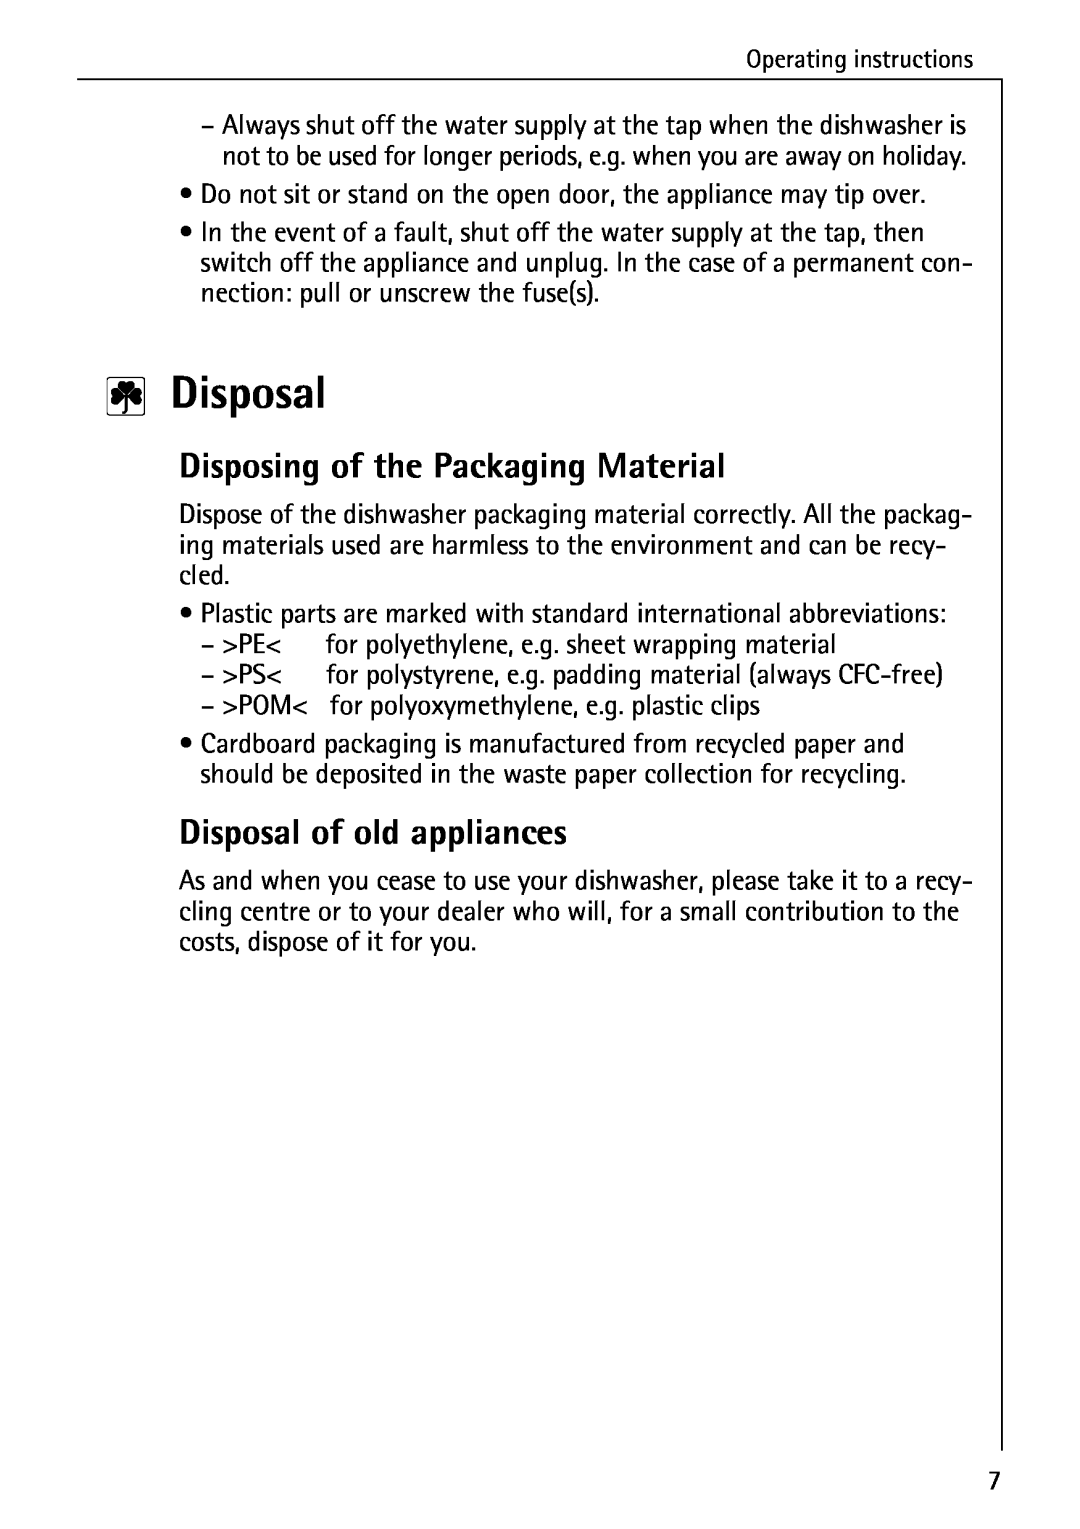 AEG 6281 I manual Disposing of the Packaging Material, Disposal of old appliances 